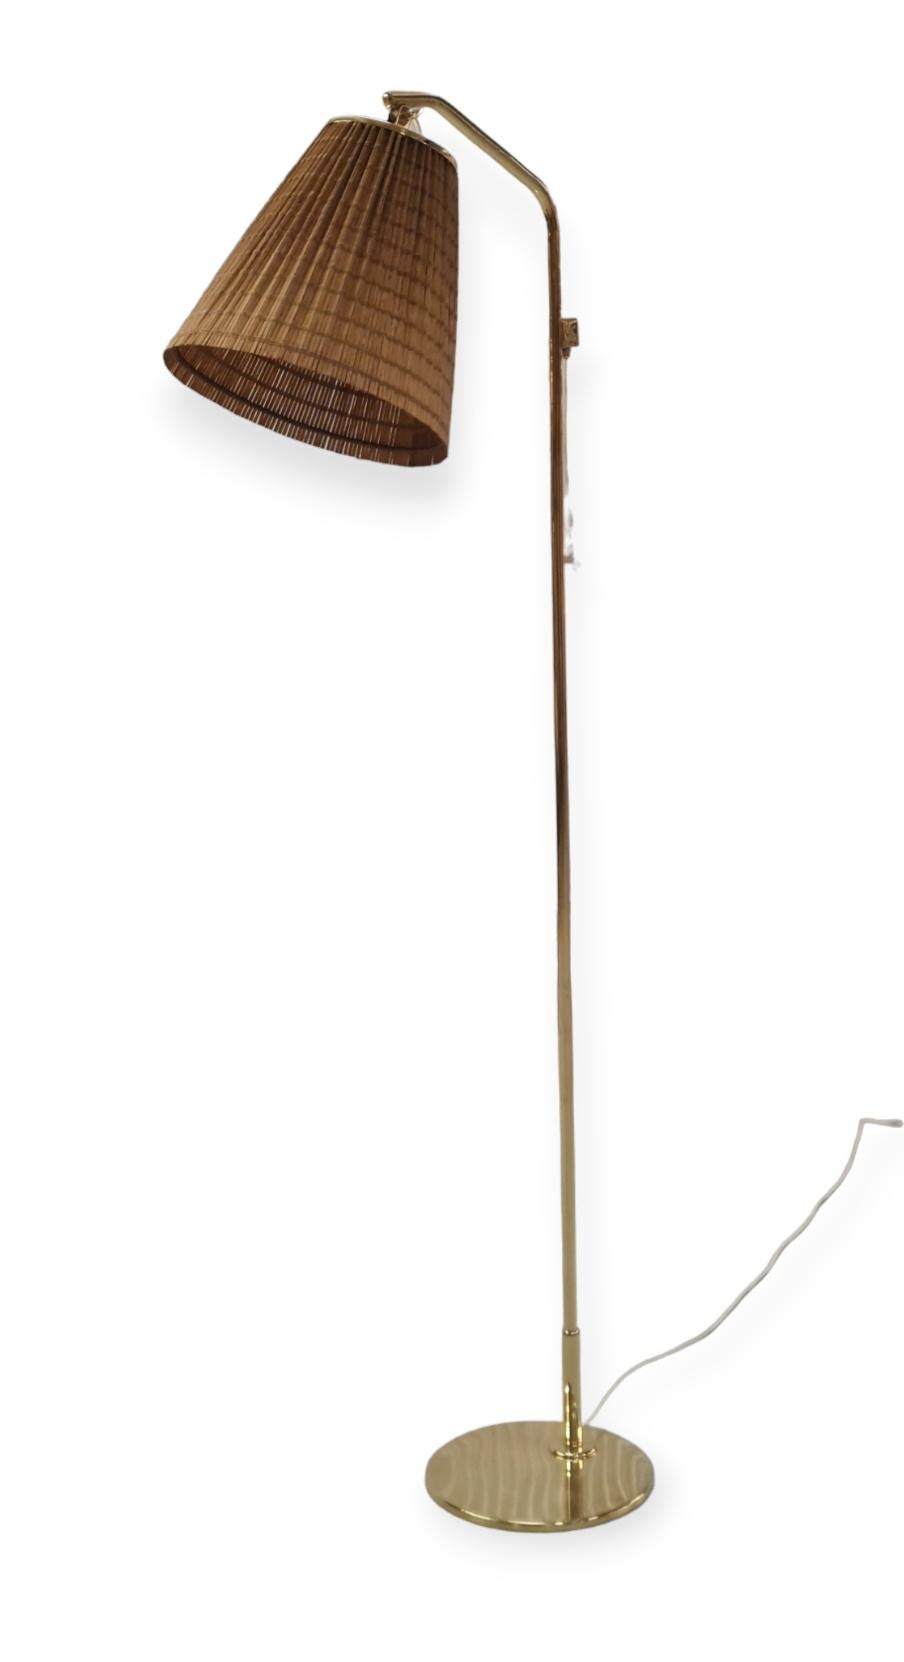 Finnish A Paavo Tynell Floor Lamp Model 9613 with Rattan Shade For Sale